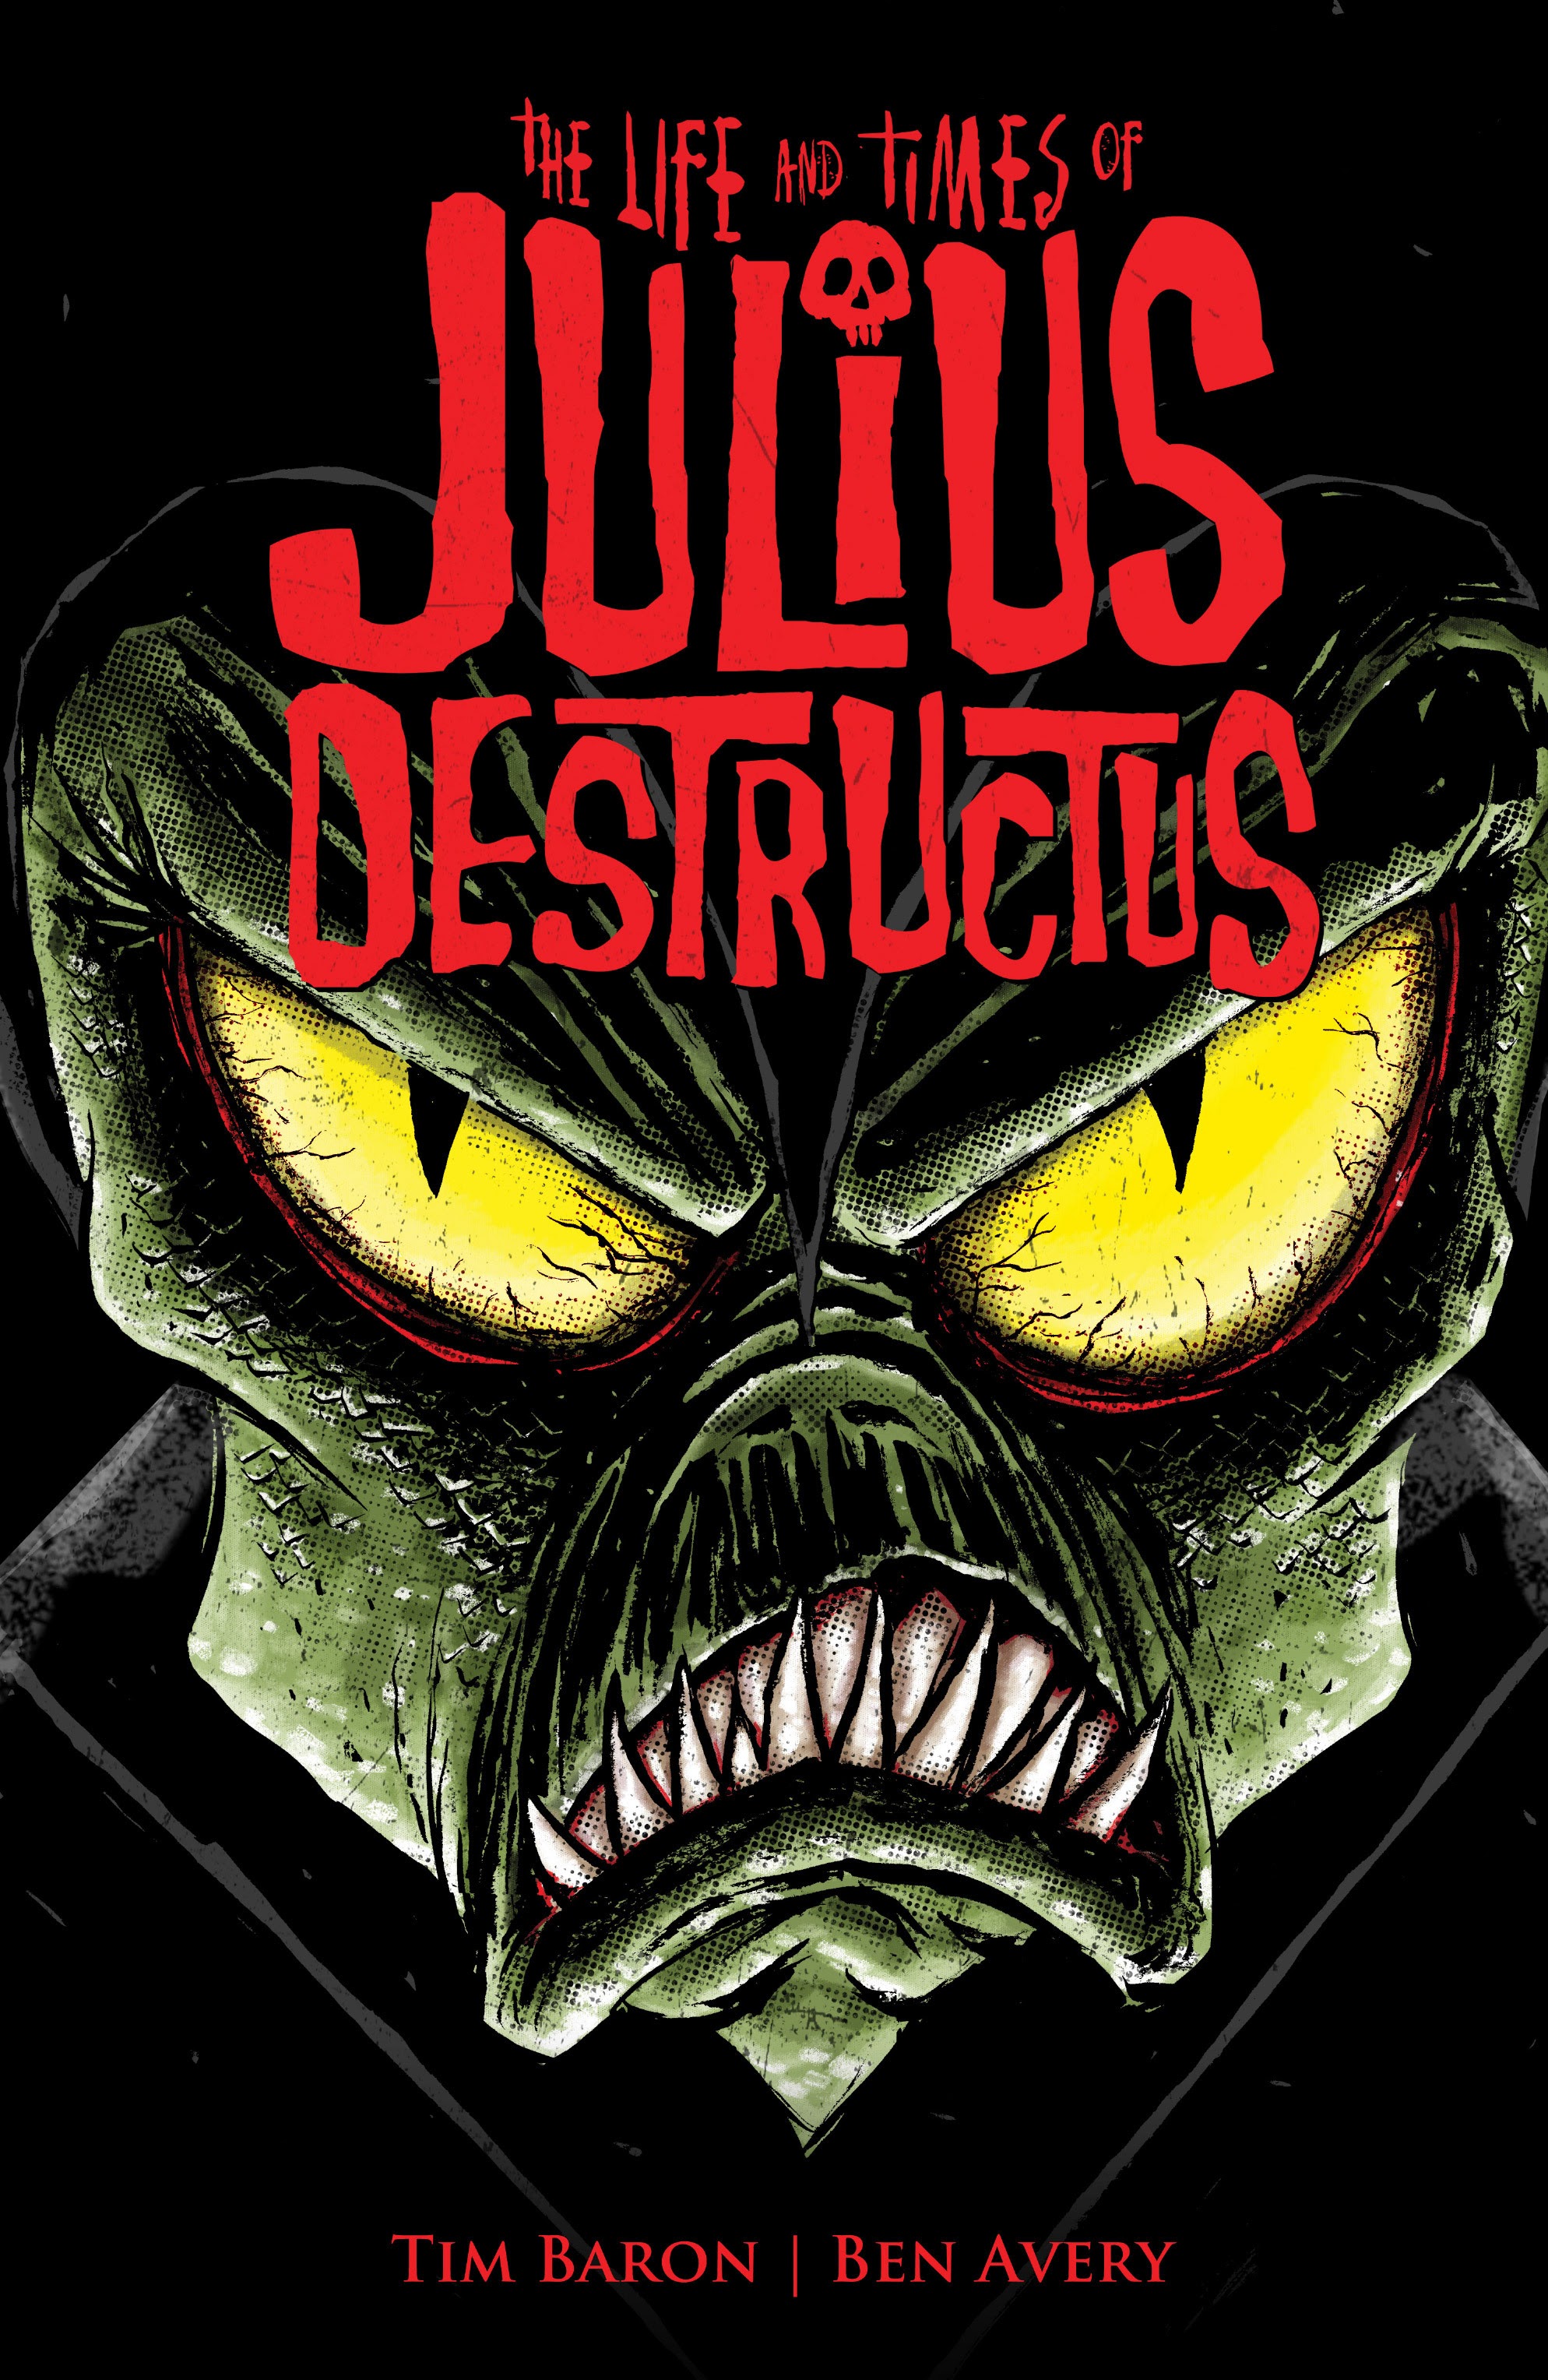 Read online The Life and Times of Julius Destructus comic -  Issue # TPB (Part 1) - 1